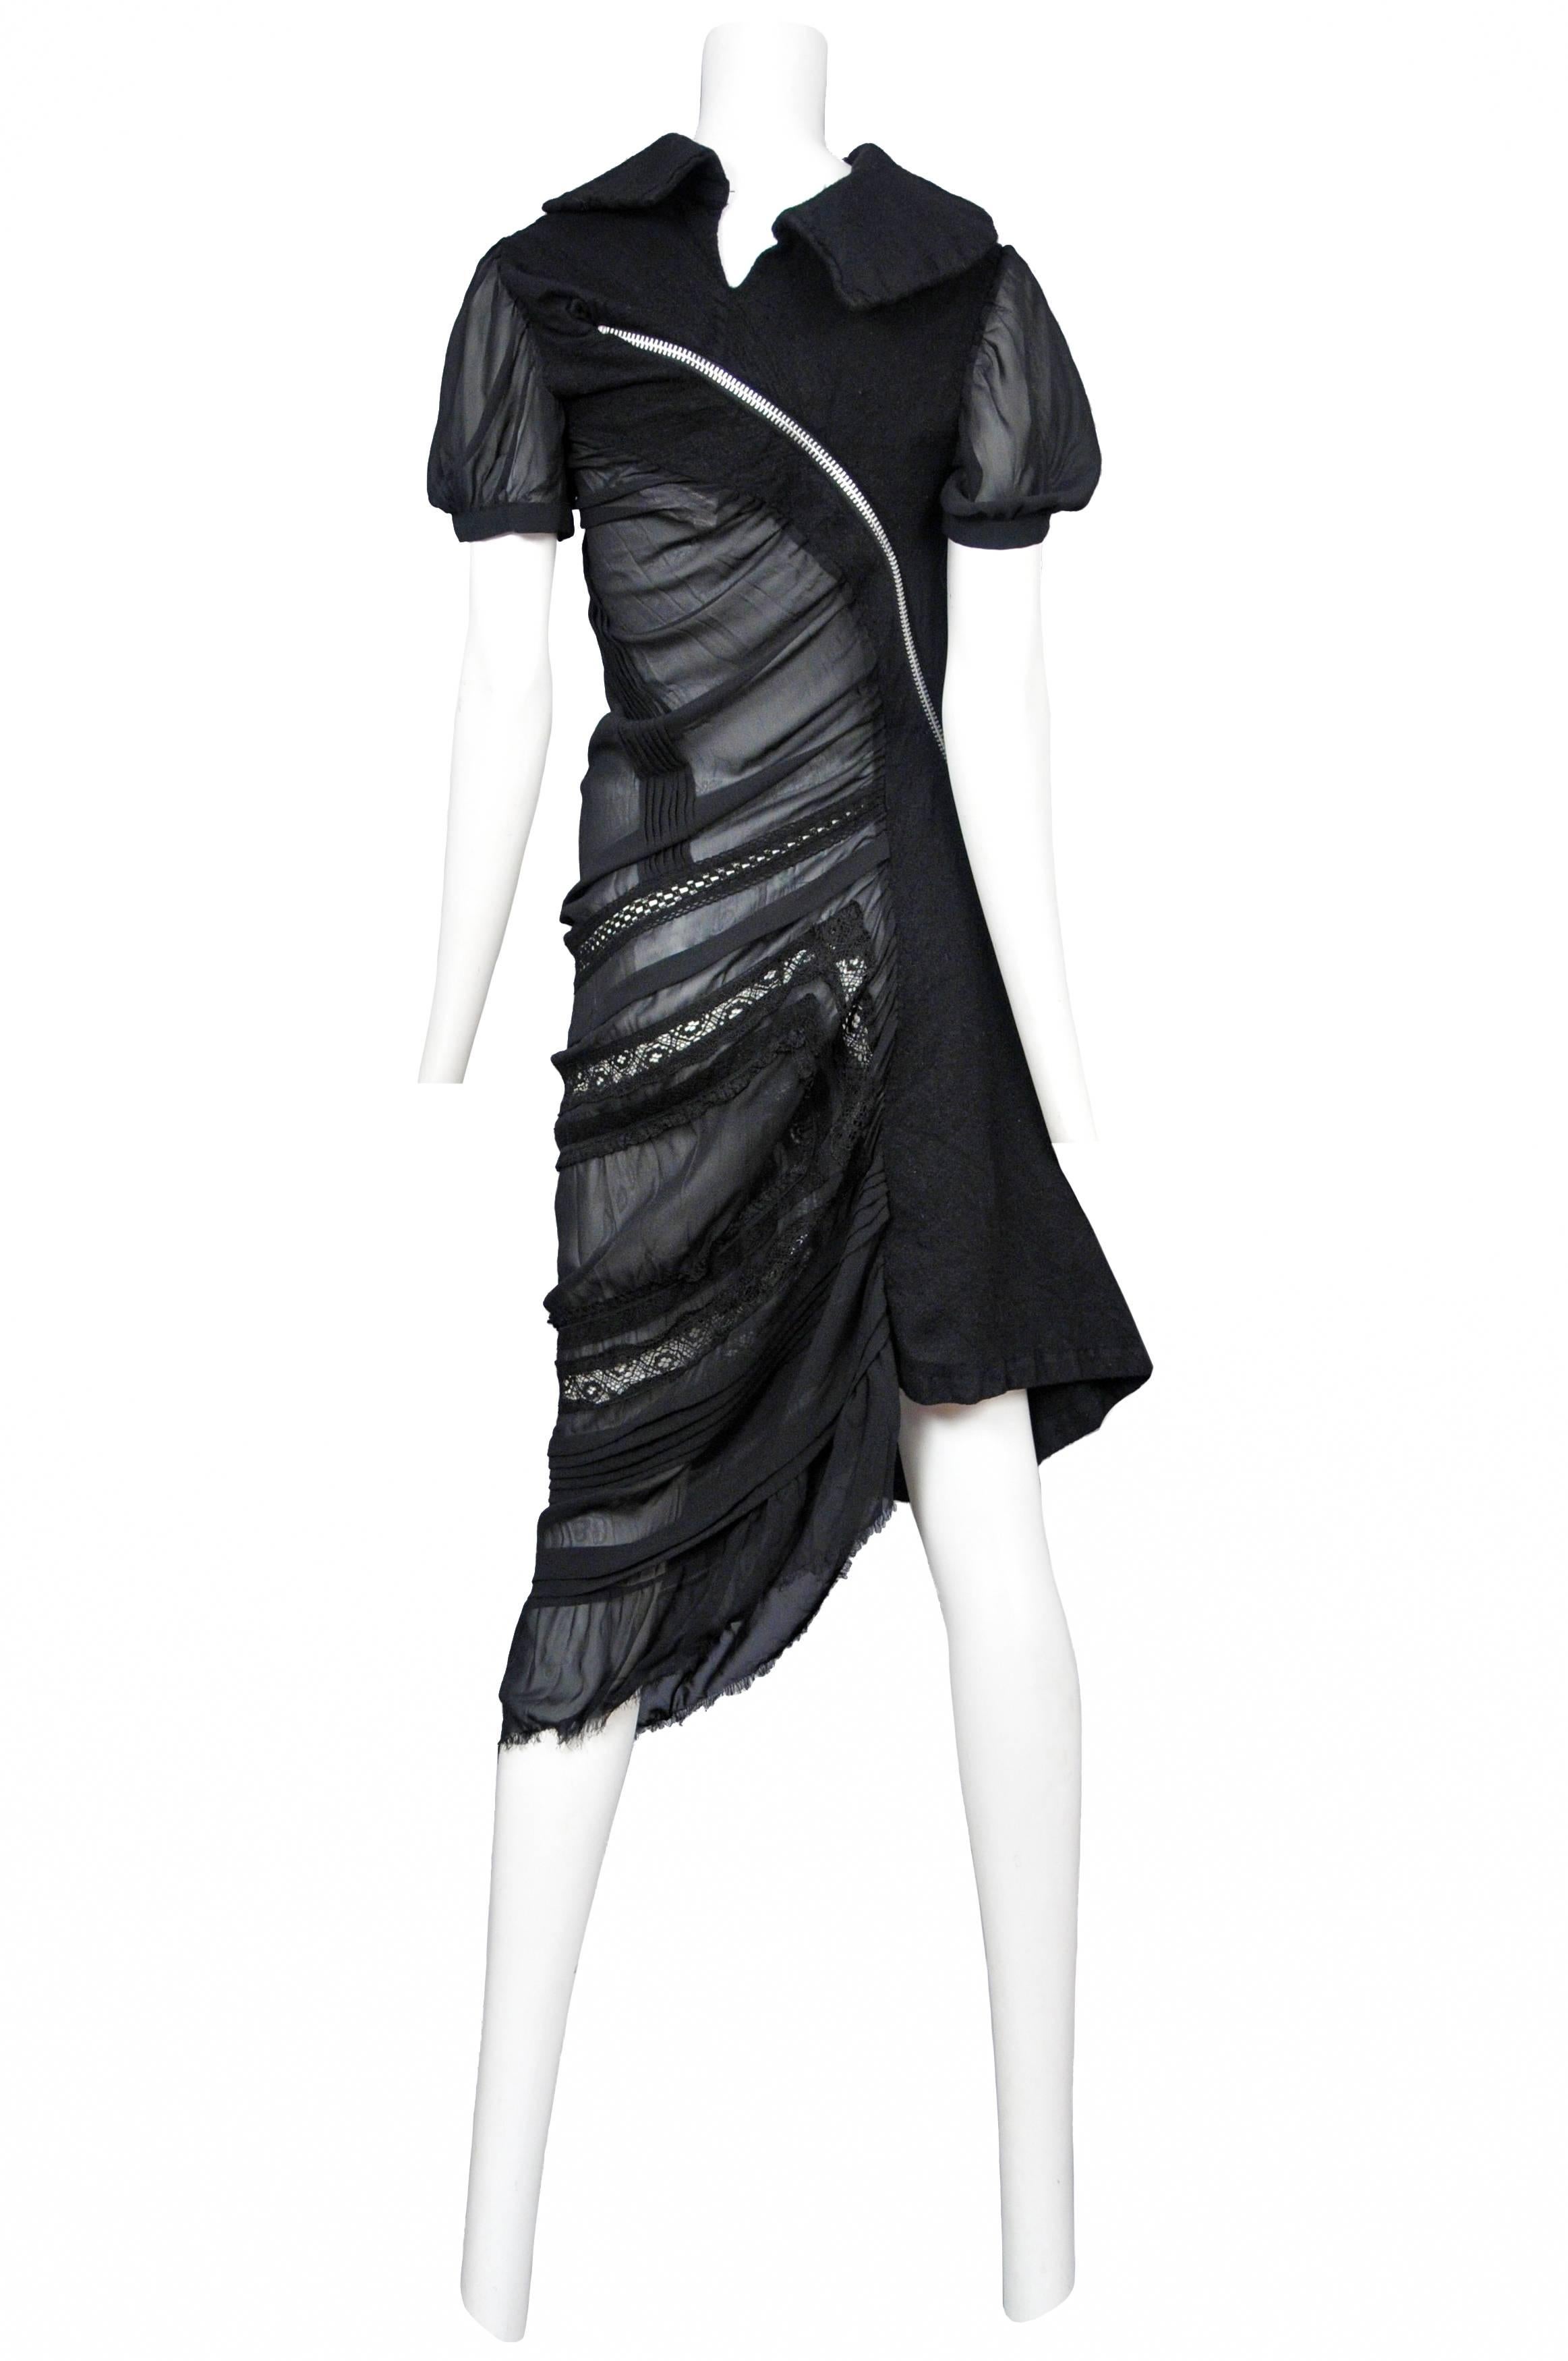 Vintage Junya Watanabe black chiffon twist dress featuring lace insets at the skirt, a button up collar and a black wool inset and zipper at the back. Circa 2007. 